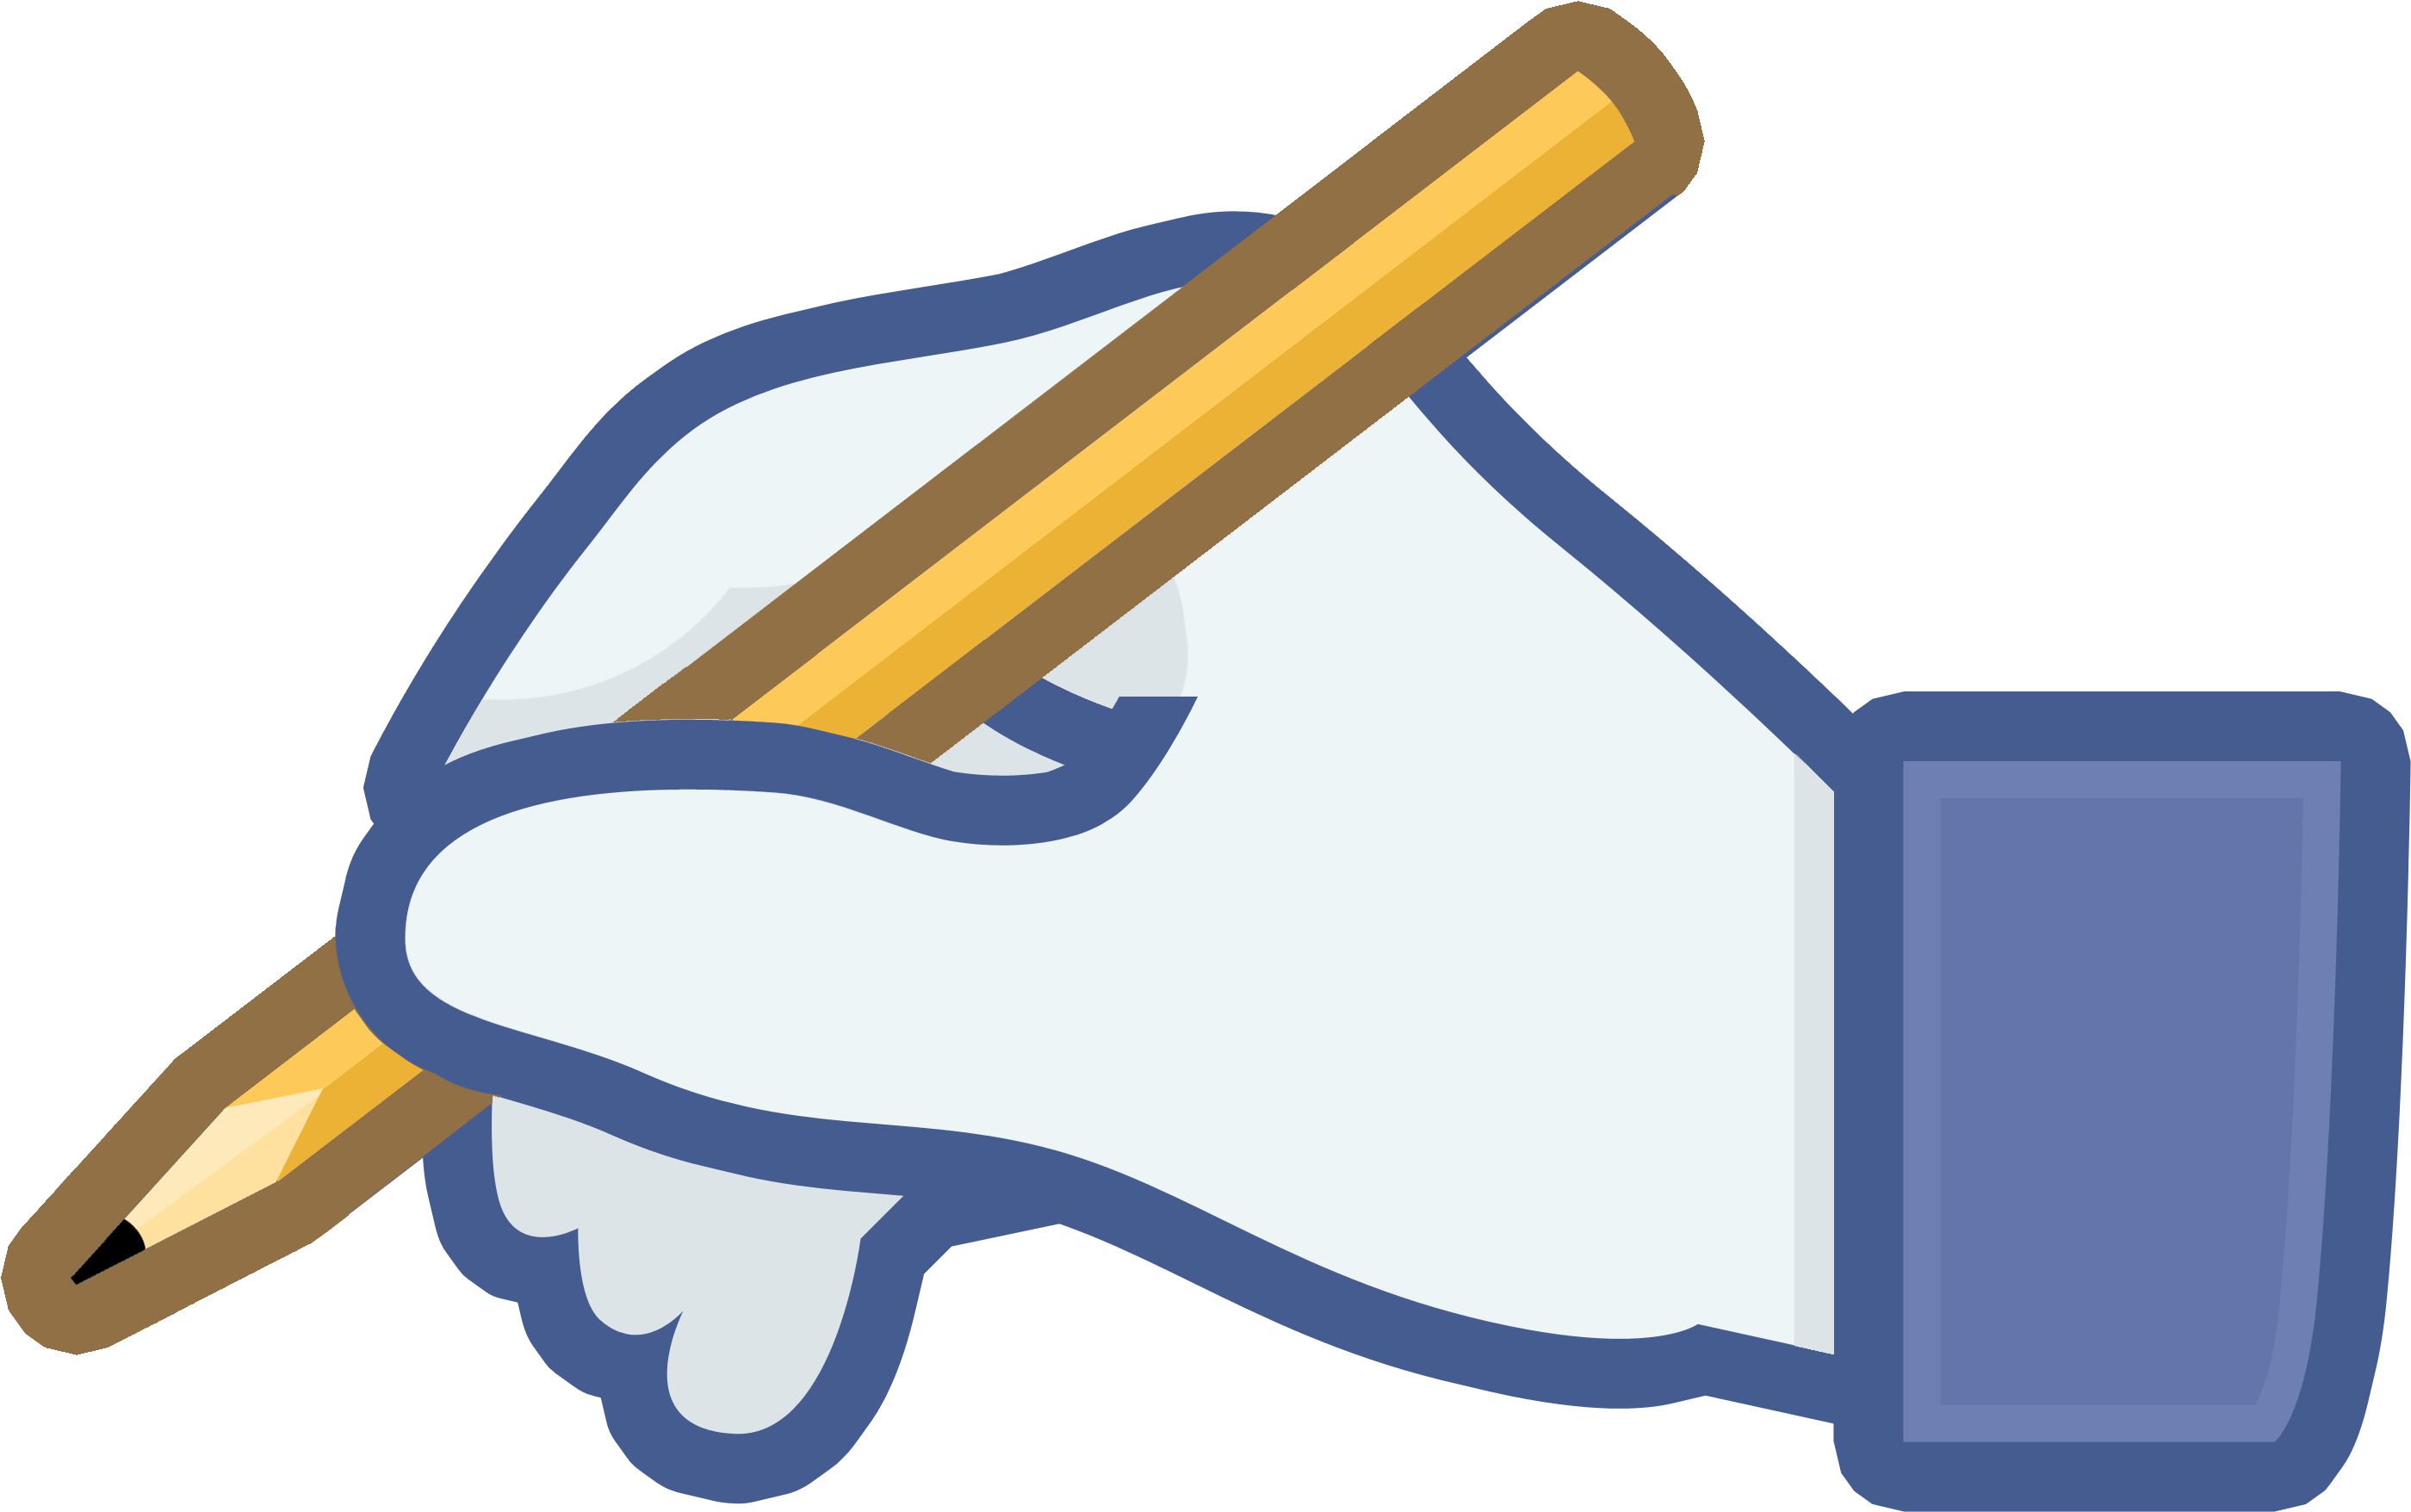 Hand With Pencil Social Media Icon Hassified Deviantart - Hand With Pencil Social Media Icon Hassified Deviantart (3069x2000)